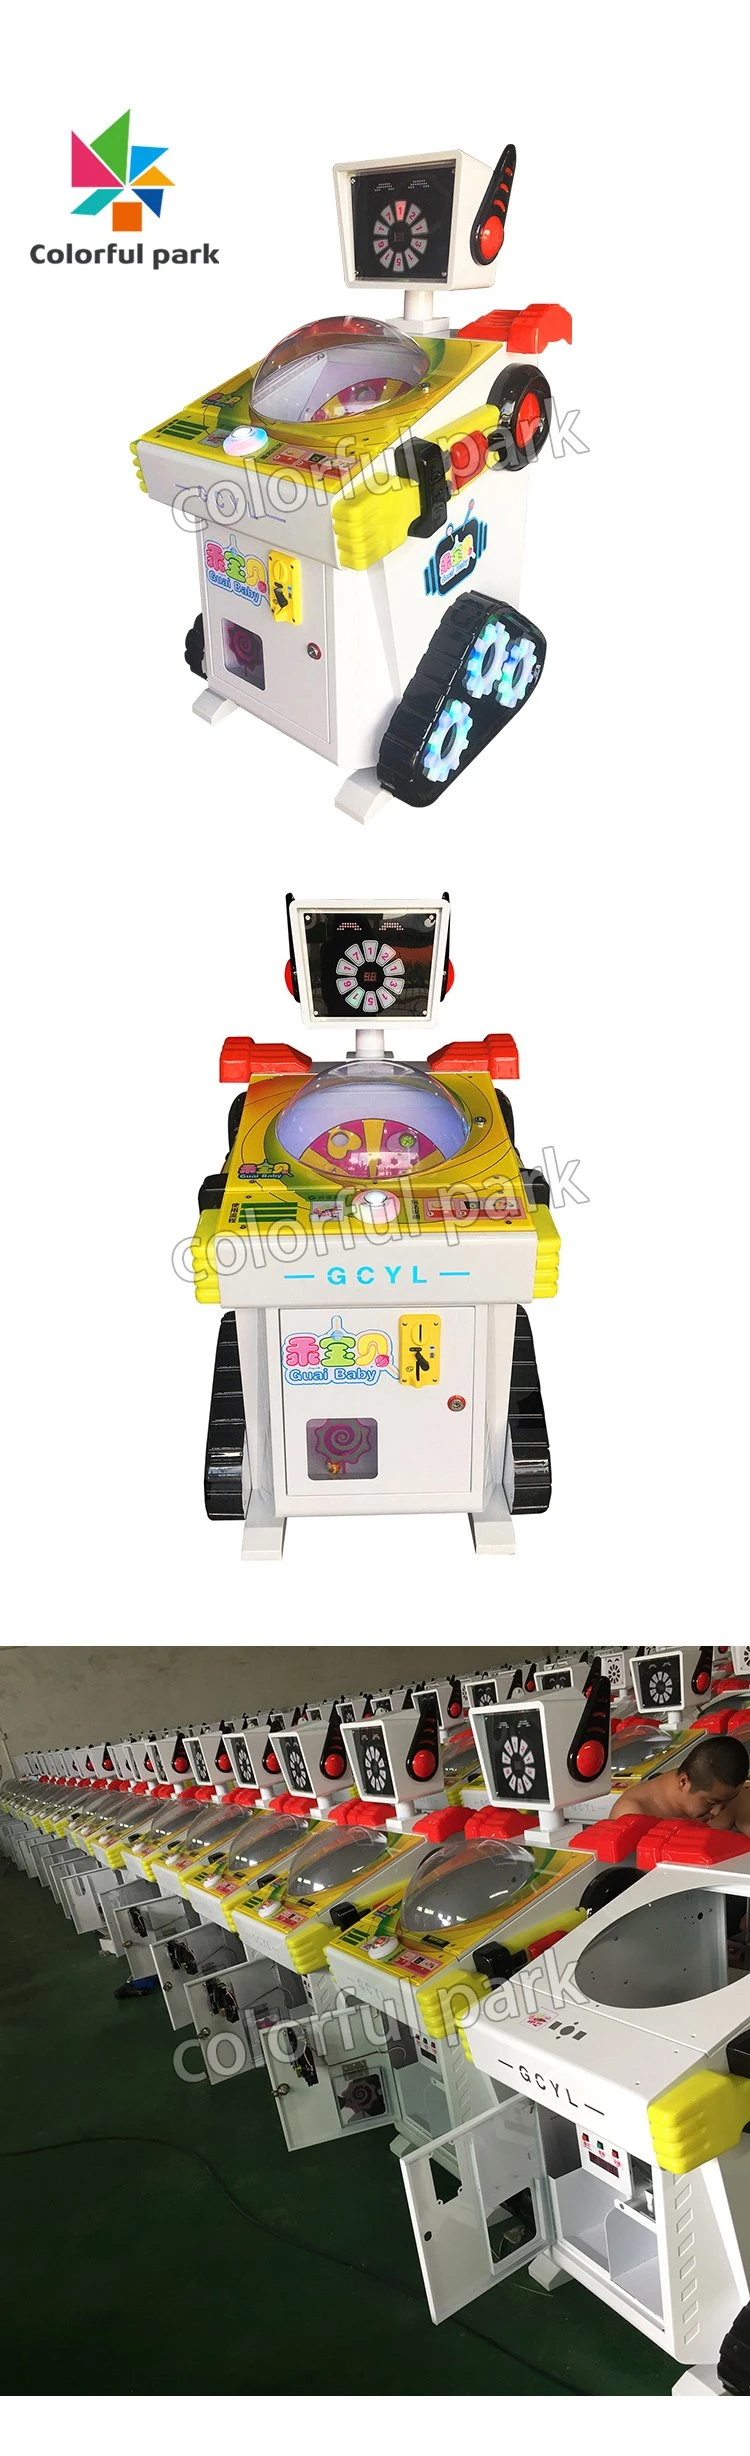 Colorful Park Candy Claw Game Machine Arcade Game Machine Video Games